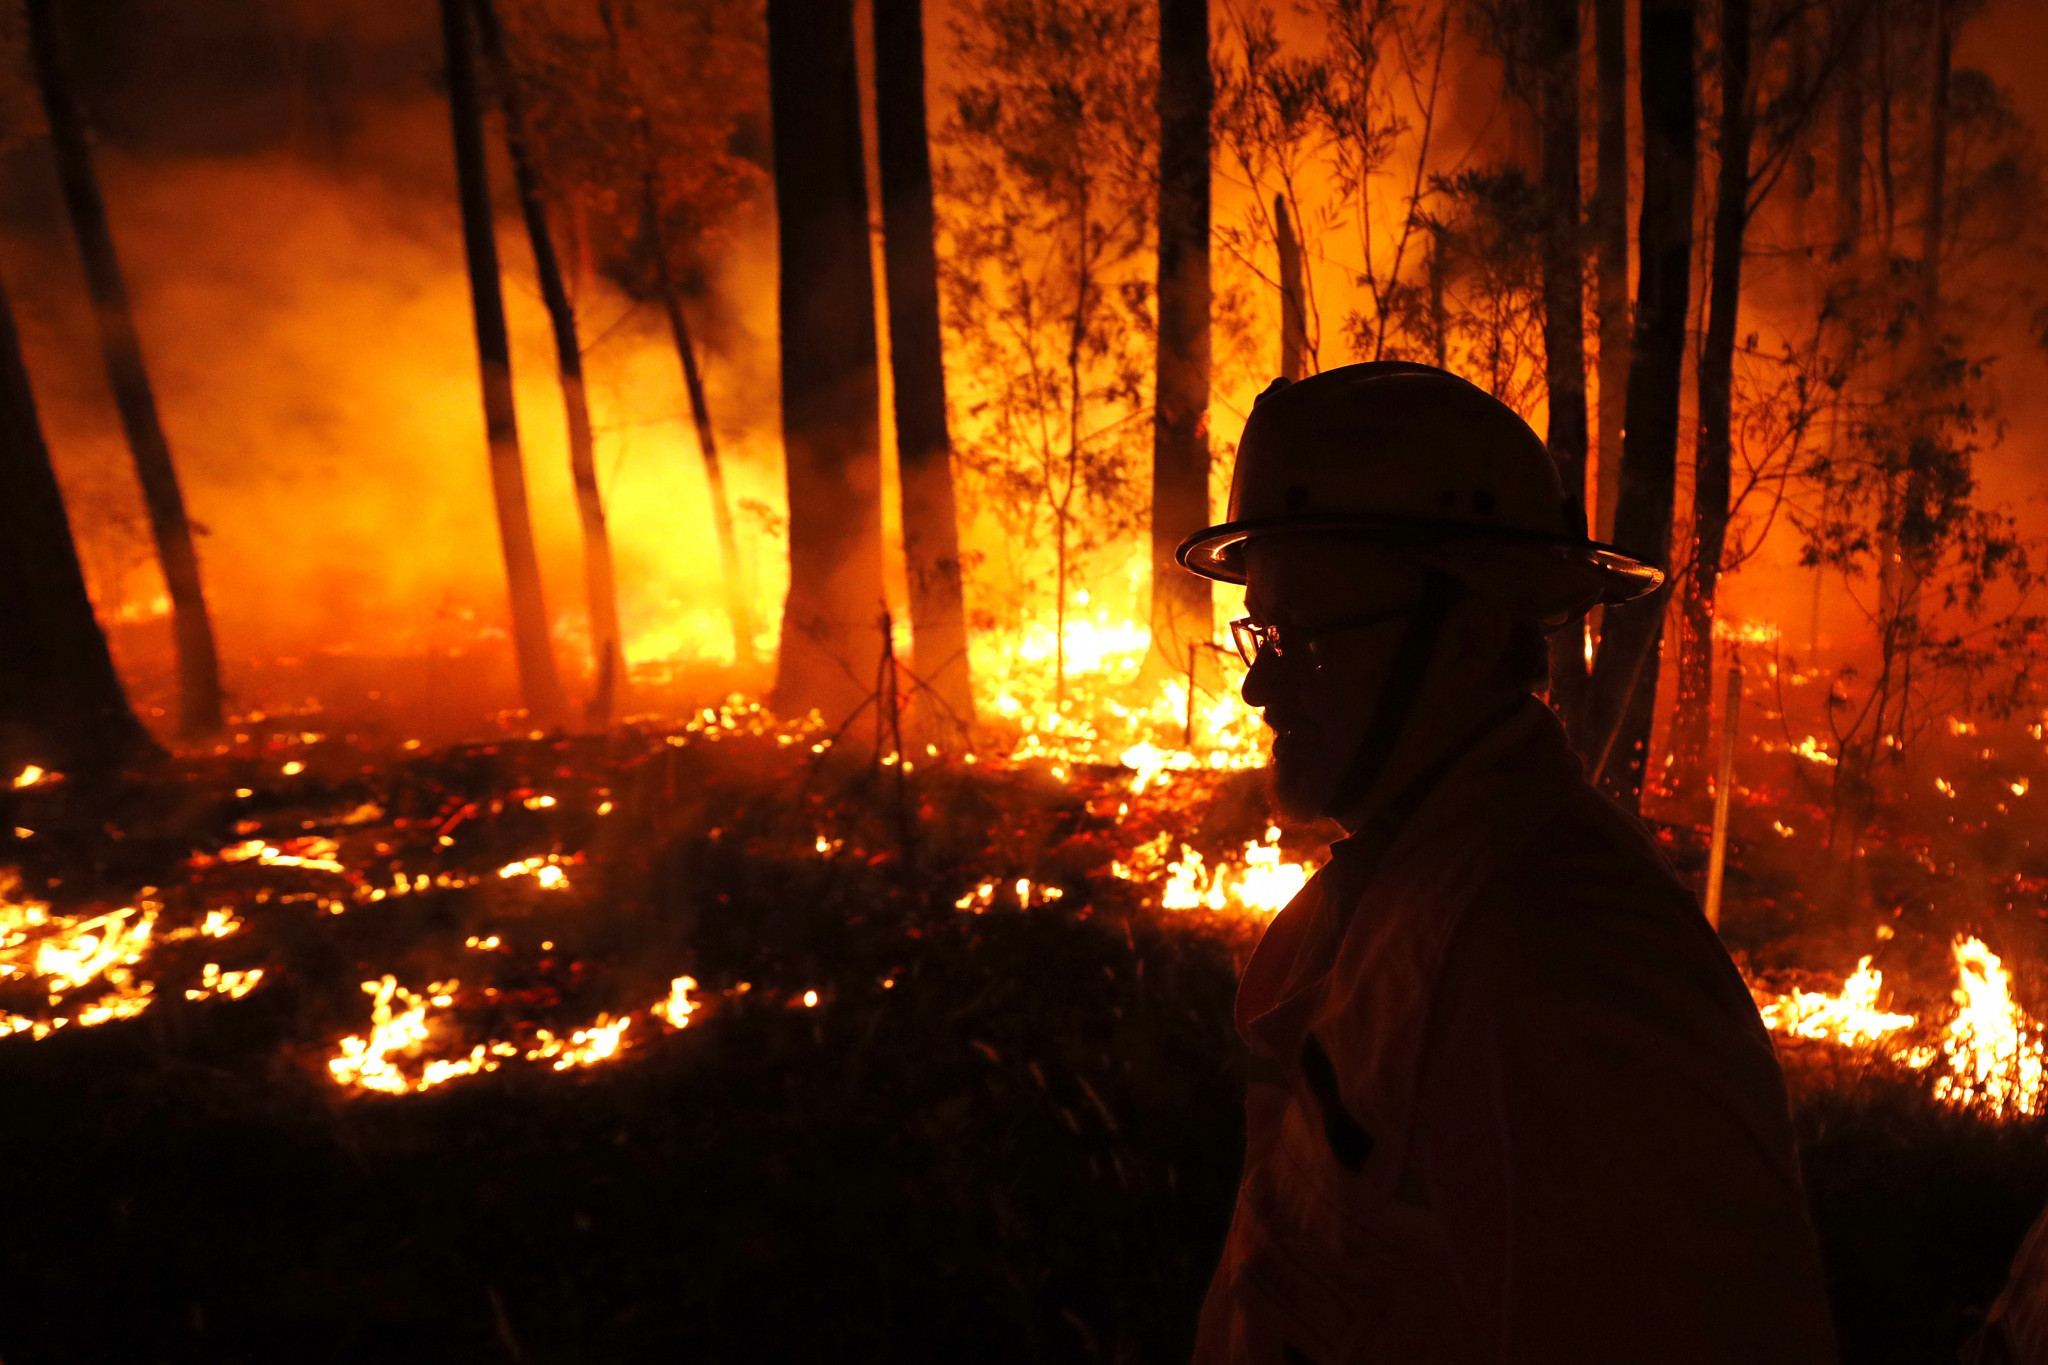 Parts of Australia have been ravaged by bushfires ©Getty Images